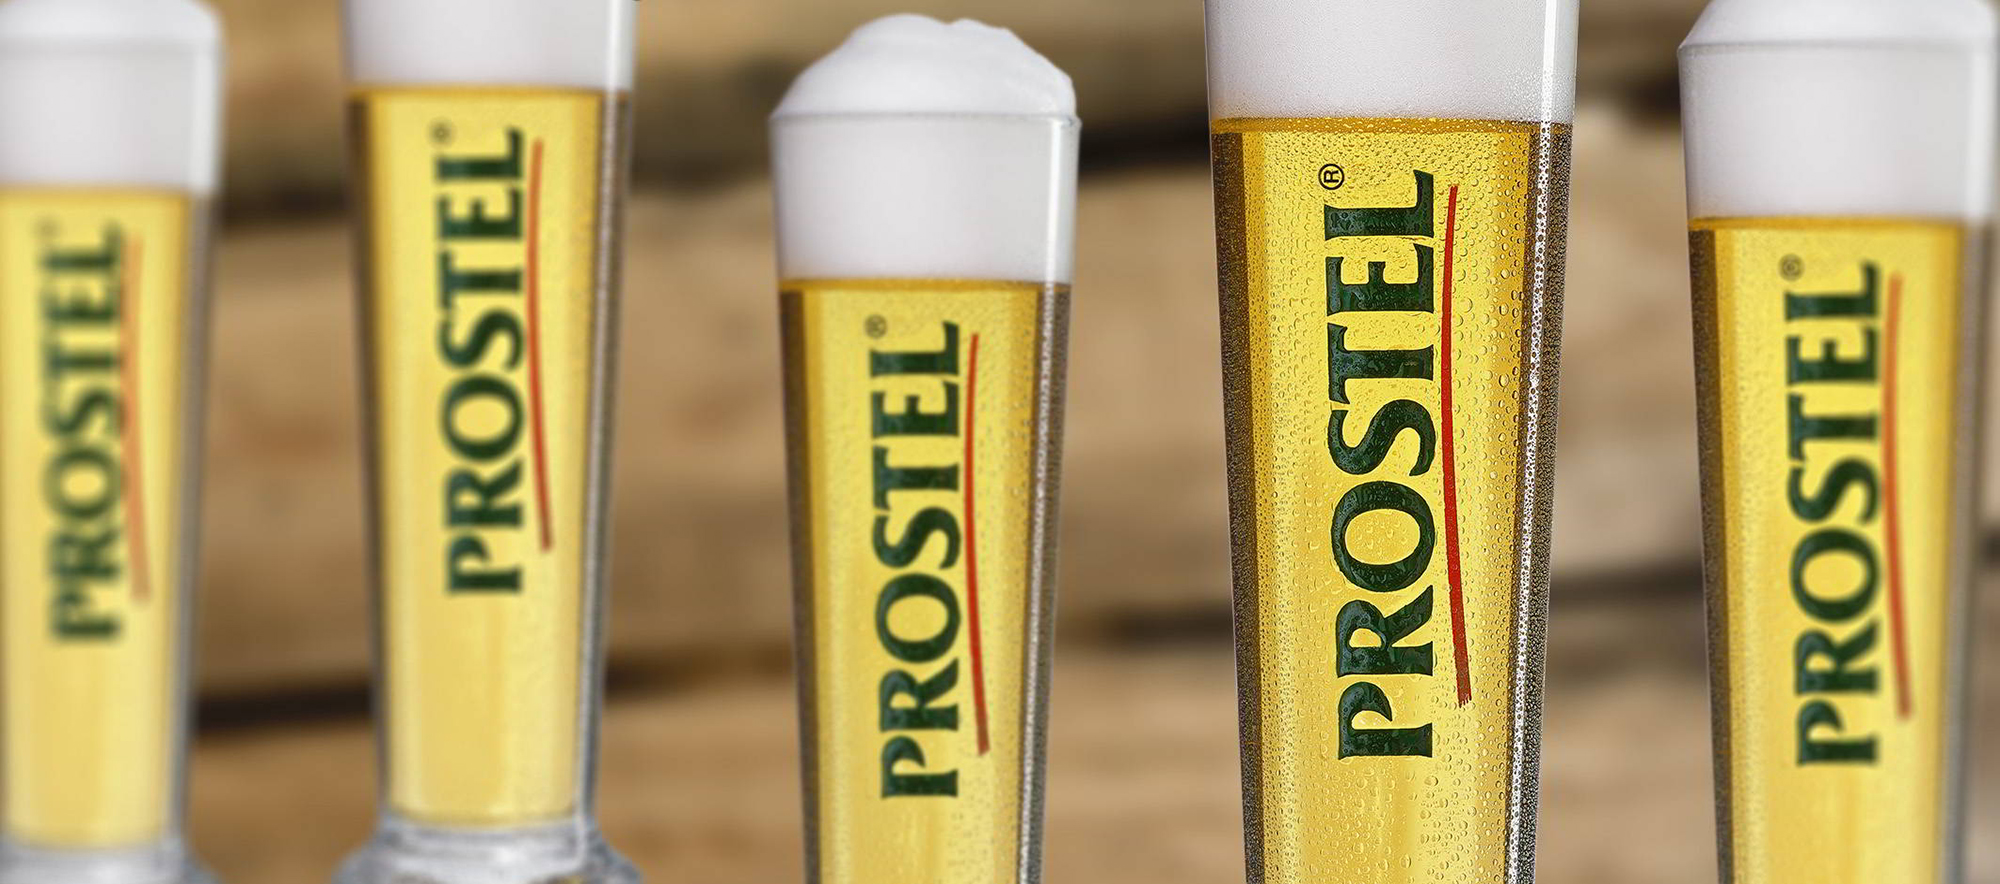 Prostel alcohol free beer from Kaiserdom